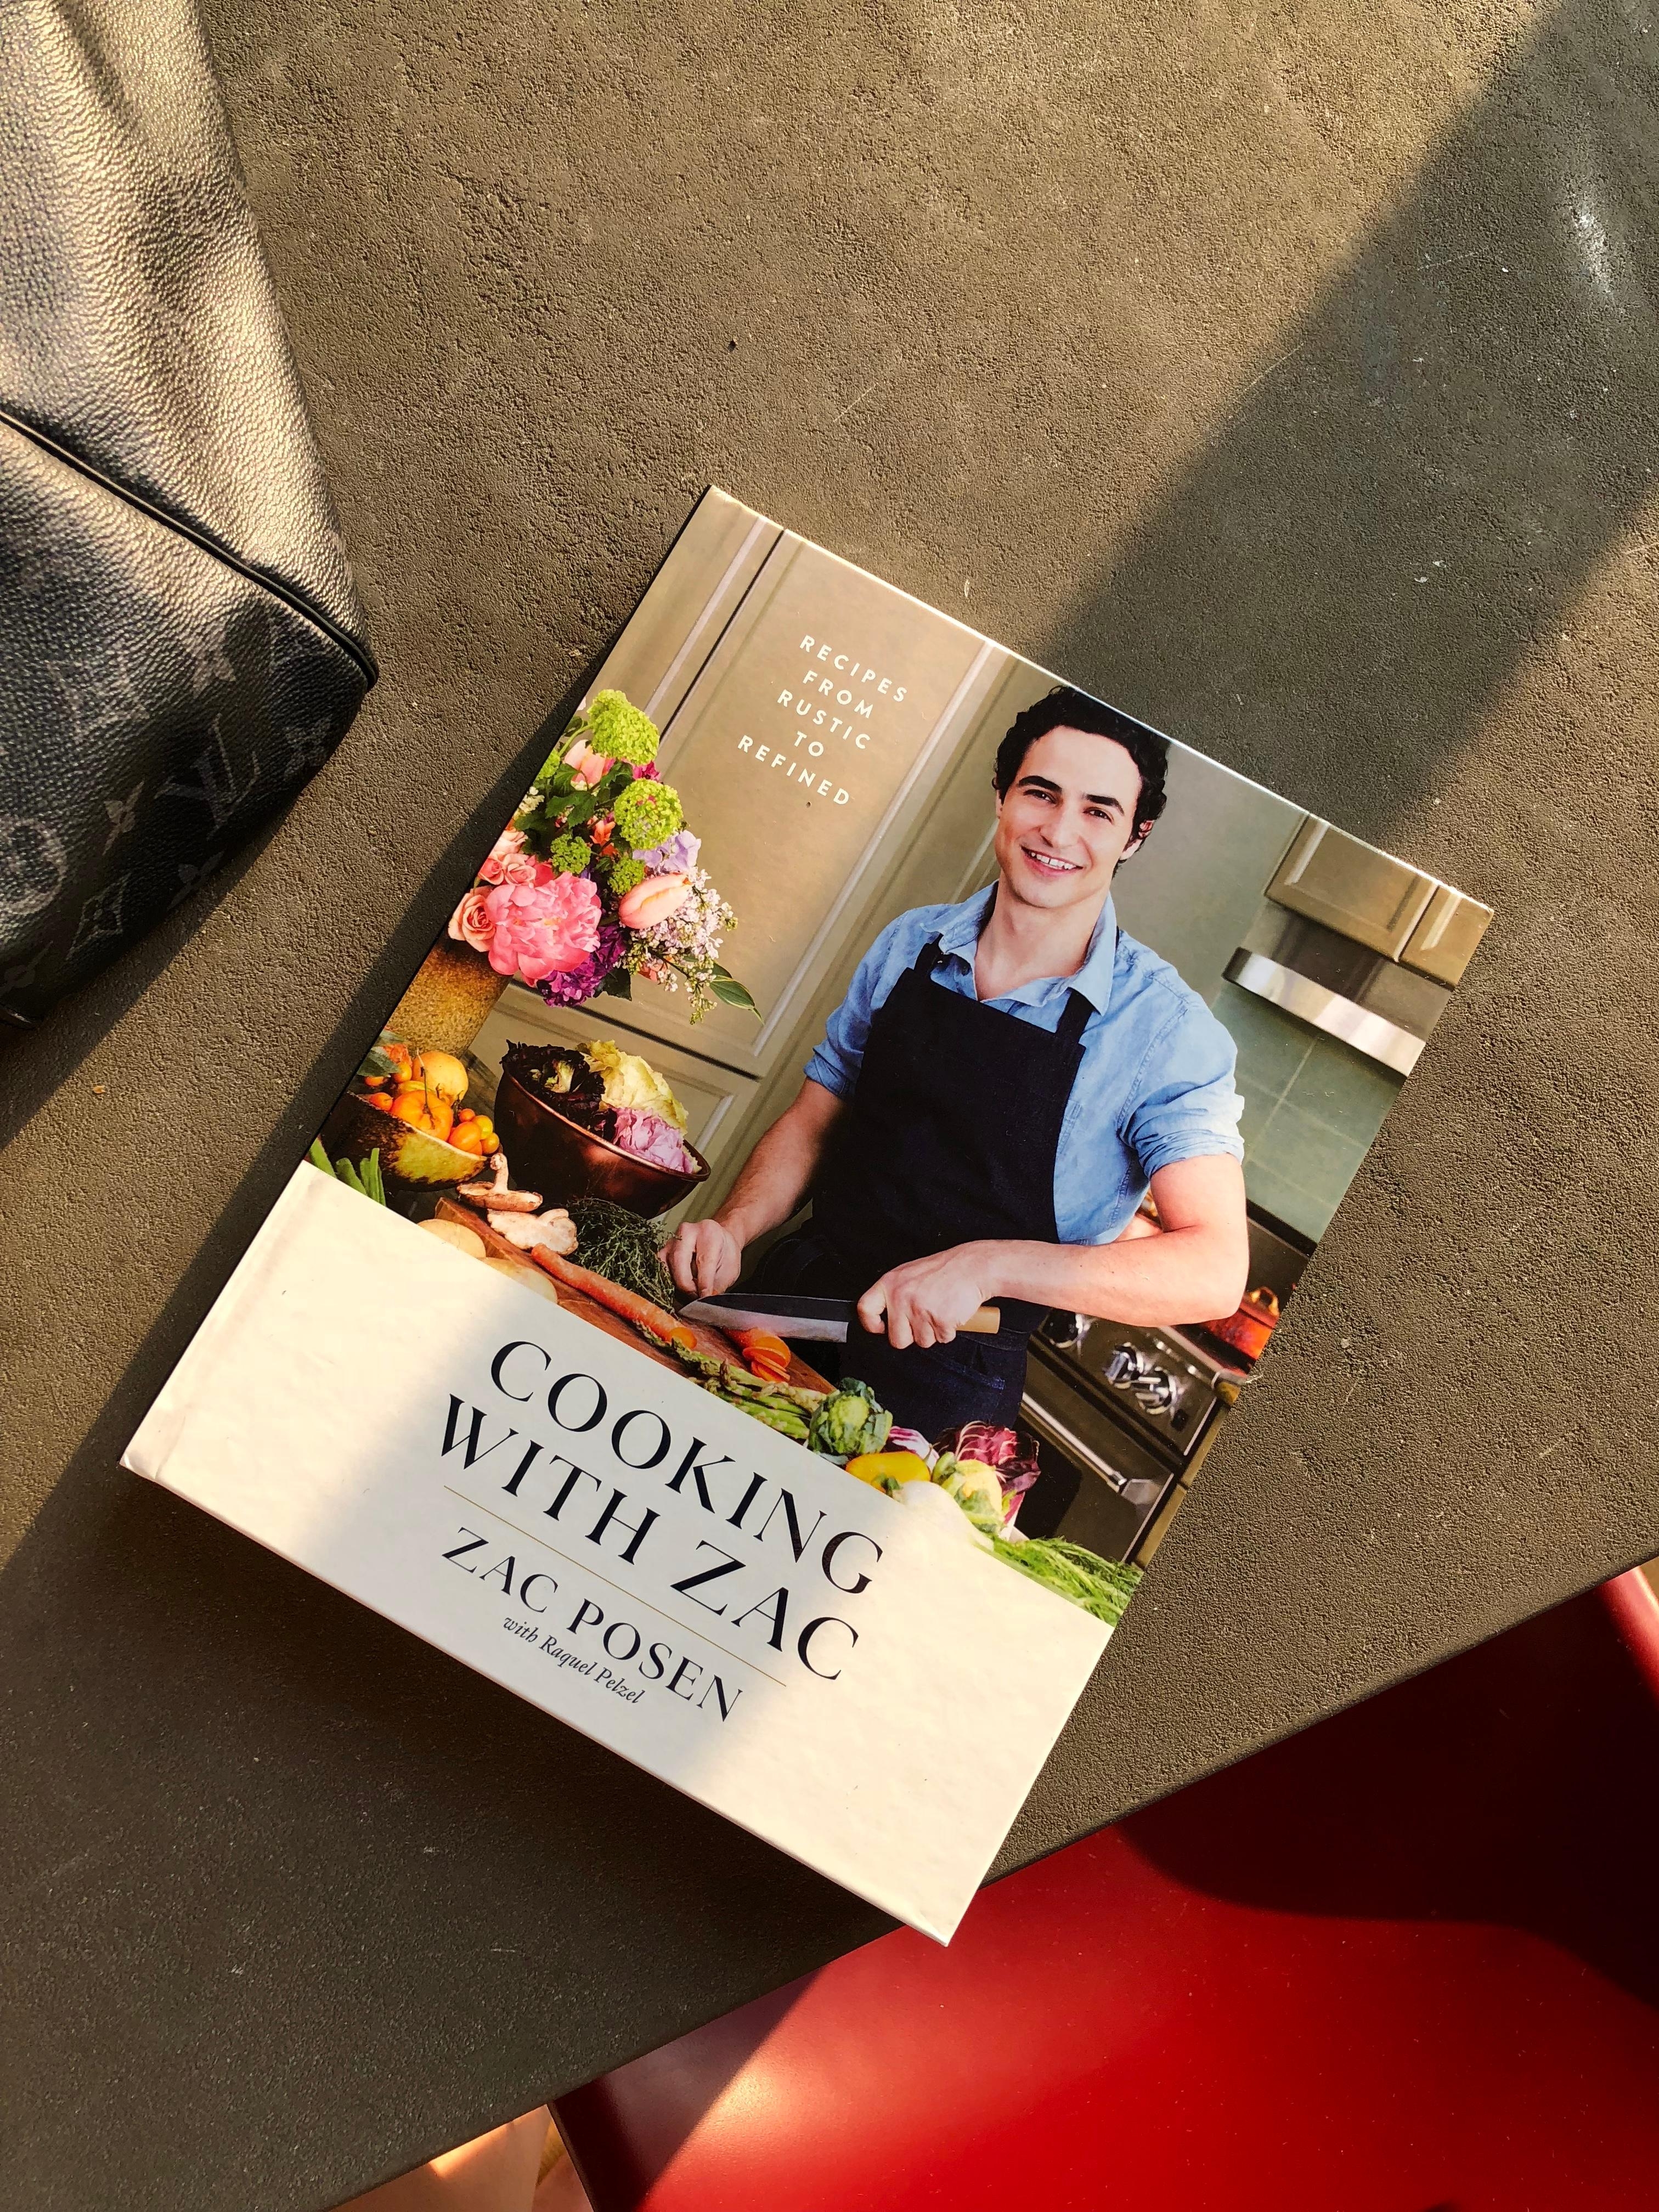 Can't wait to try this. 👨‍🍳 #kochen #cookingwithzac #fashion #kochbuch #food #kitchen #küche #style #zacposen #cookbook